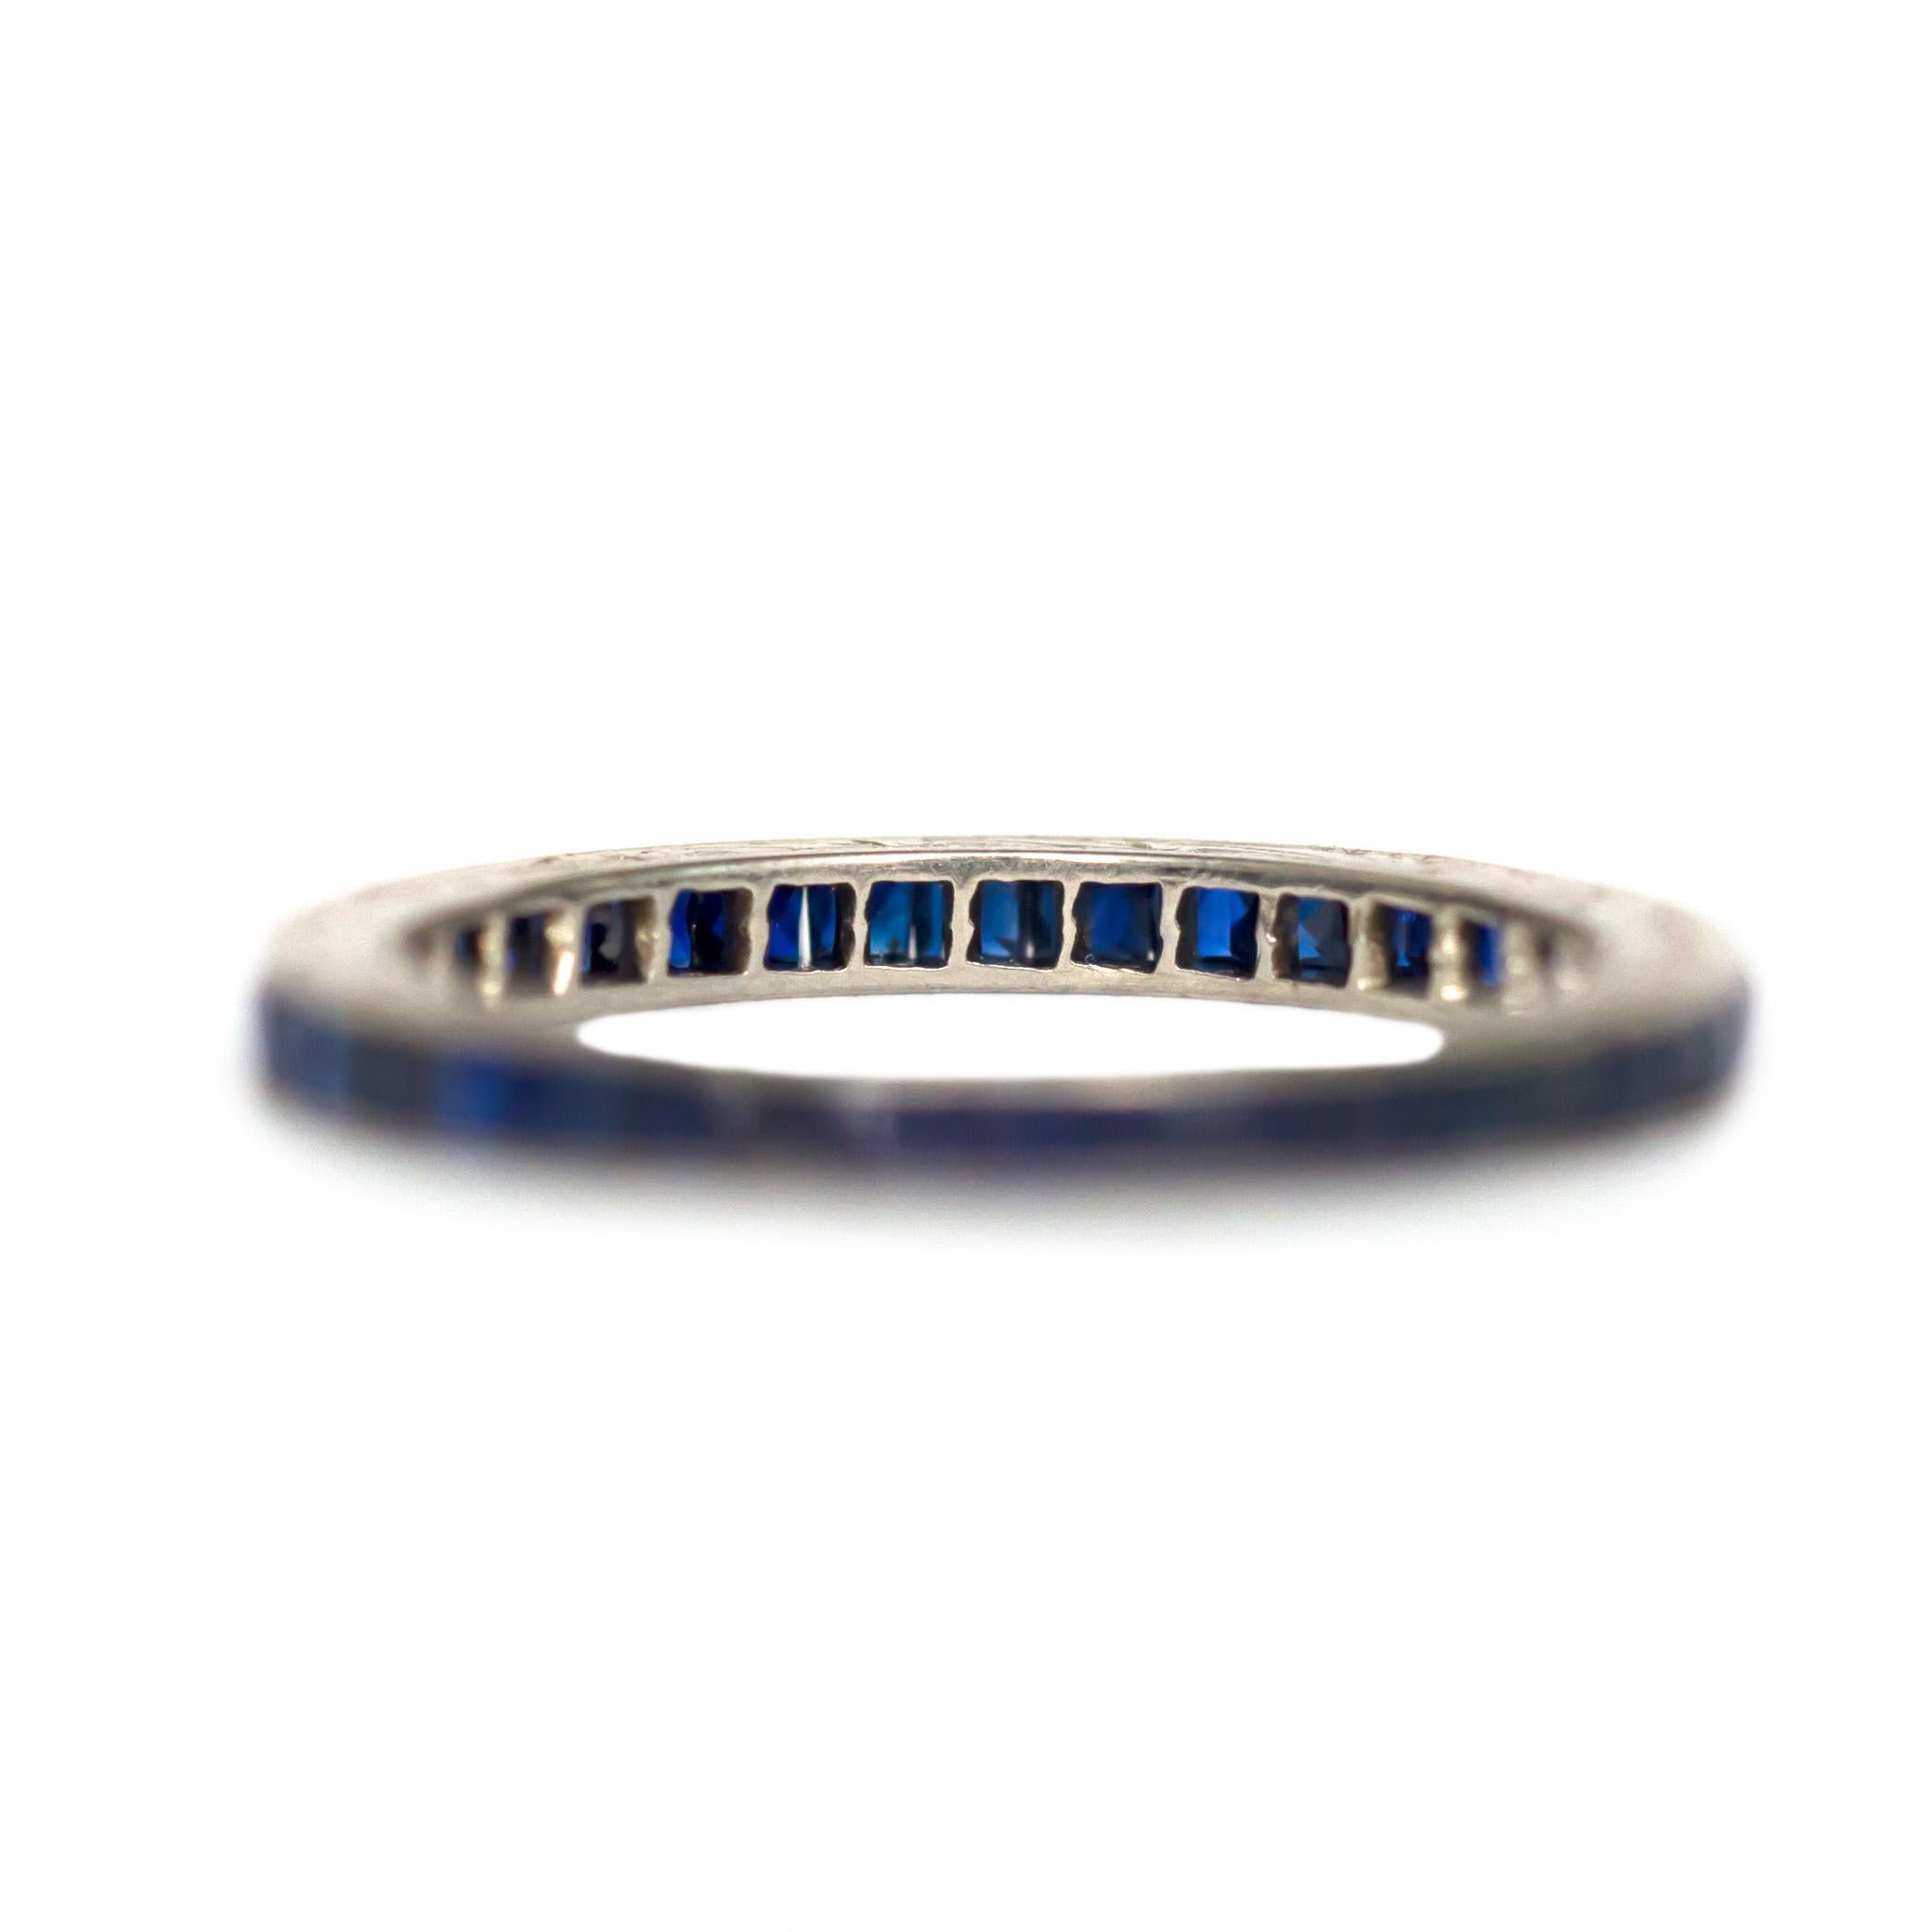 Ring Size: 5.25
Metal Type: 18 karat White Gold  [Hallmarked, and Tested]
Weight:  1.1  grams

Sapphire Details:
Weight: 1.00 carat, total weight
Cut: French cut
Color: Blue
Clarity: VS

Finger to Top of Stone Measurement: 1.5MM
Condition: 